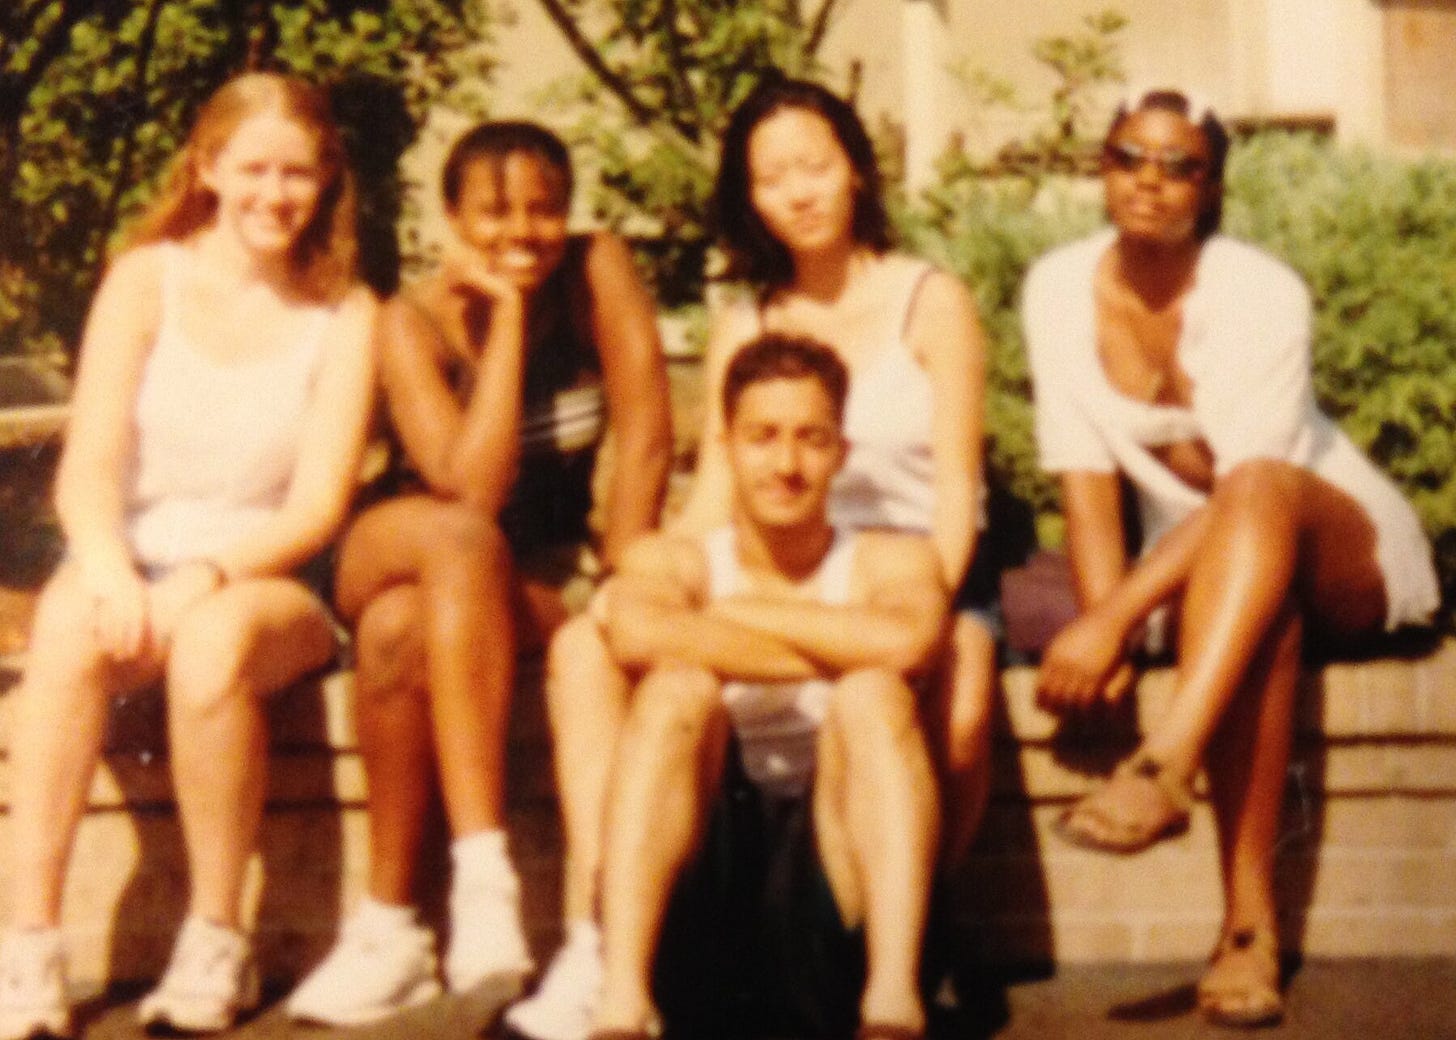 Five teenagers (two Black girls, a white girl, a Korean girl, and a Pakistani boy) sit on a ledge wearing summer clothes